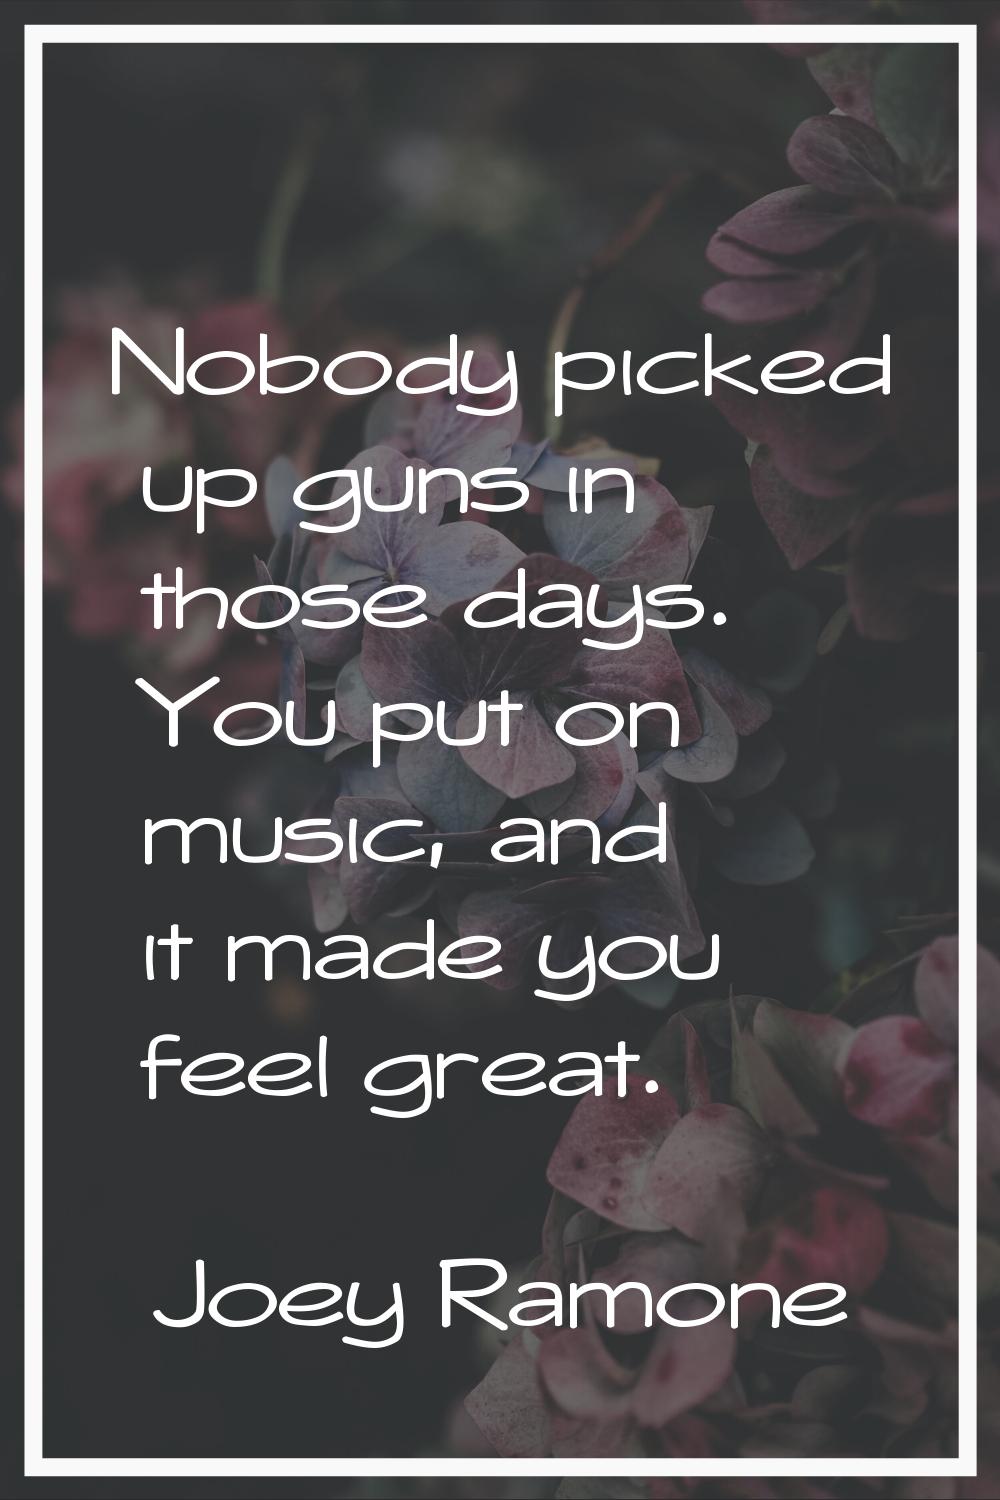 Nobody picked up guns in those days. You put on music, and it made you feel great.